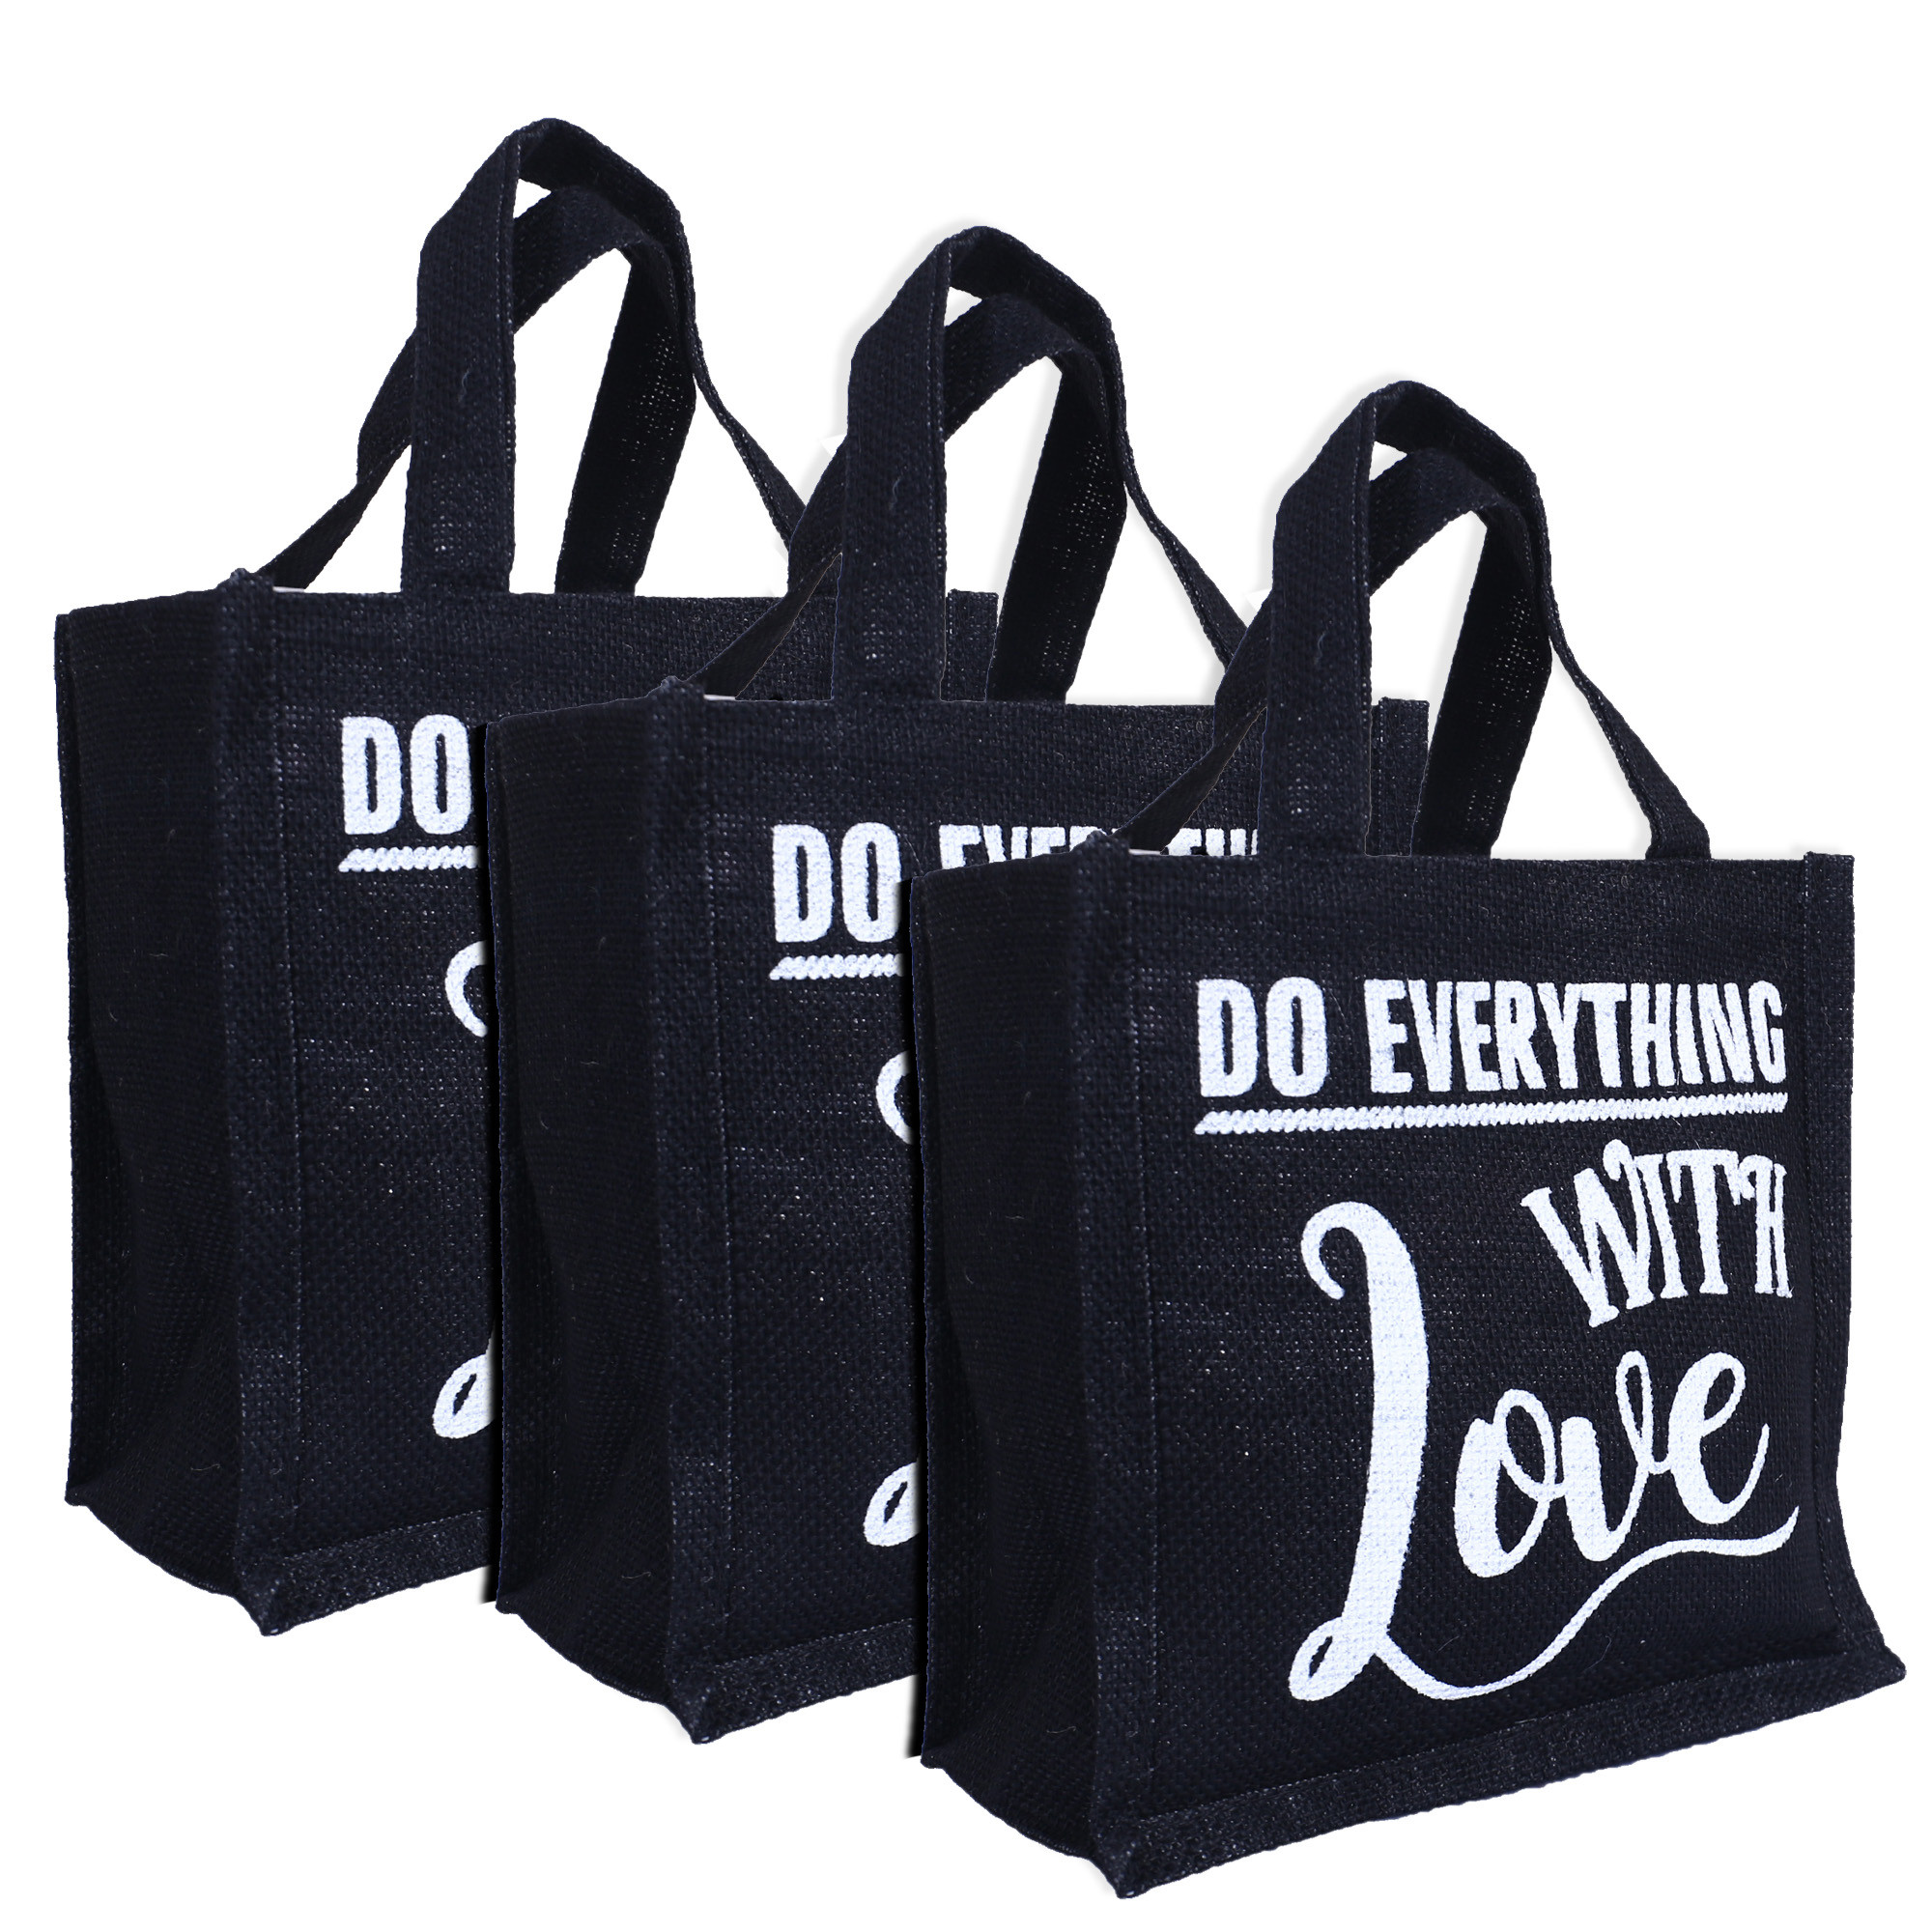 Kuber Industries Lunch Bag|Reusable Jute Fabric Tote Bag|Do Everything With Love Print Tiffin Carry Hand bag with Handle For office,School,Gift (Black)